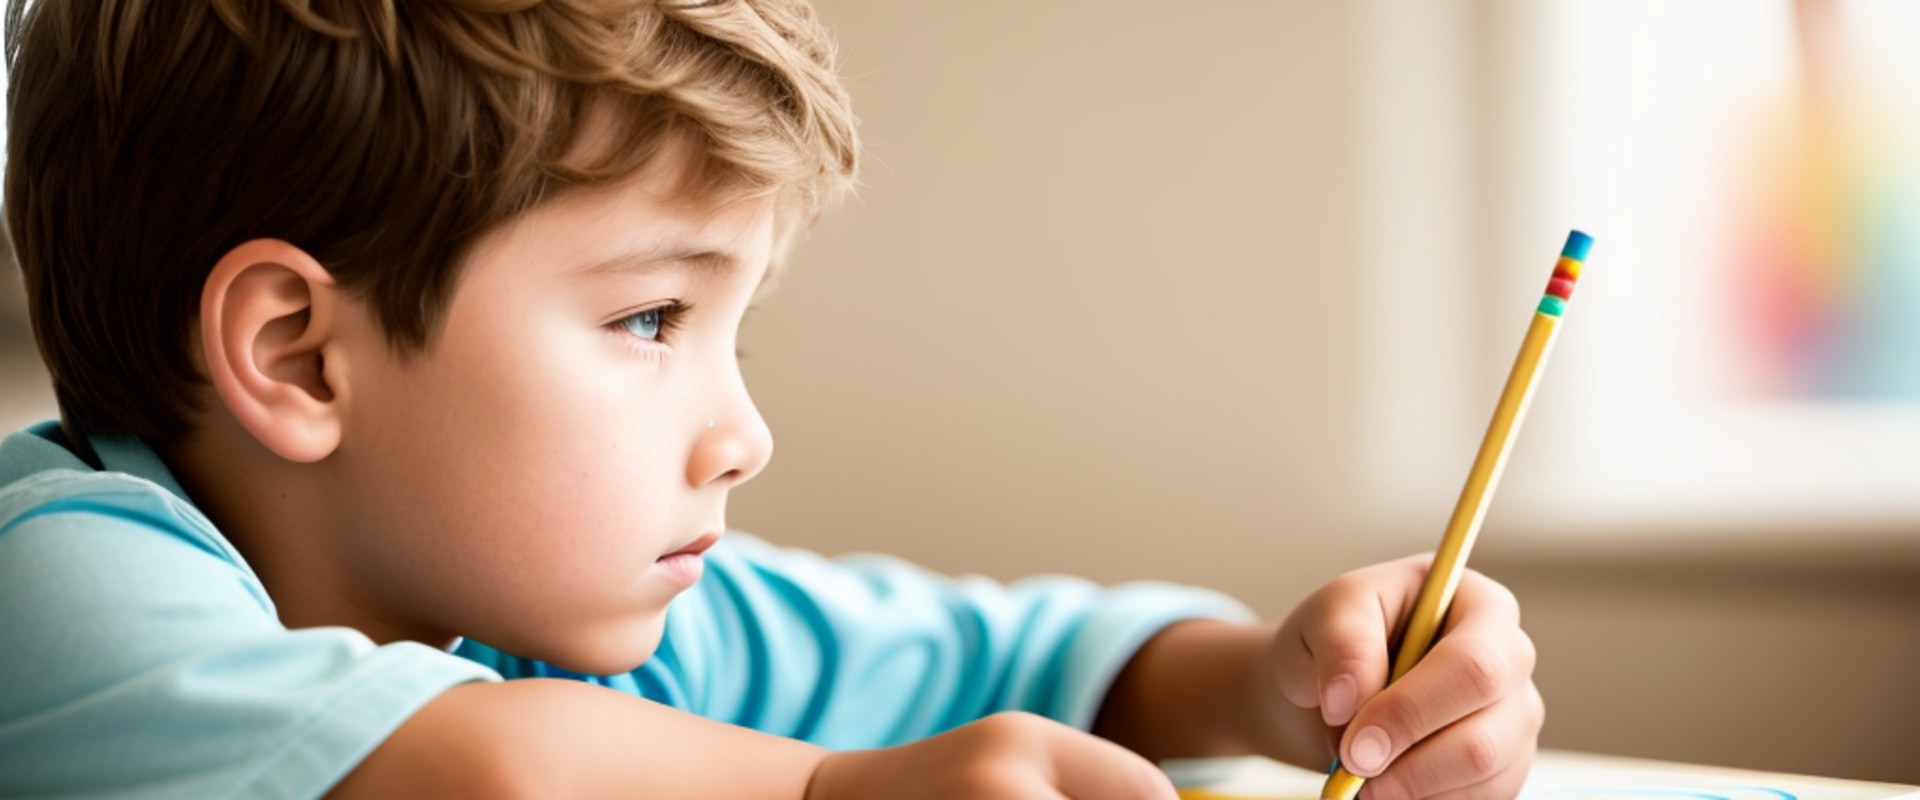 Understanding Diagnostic Tests and Tools for Autism Diagnosis